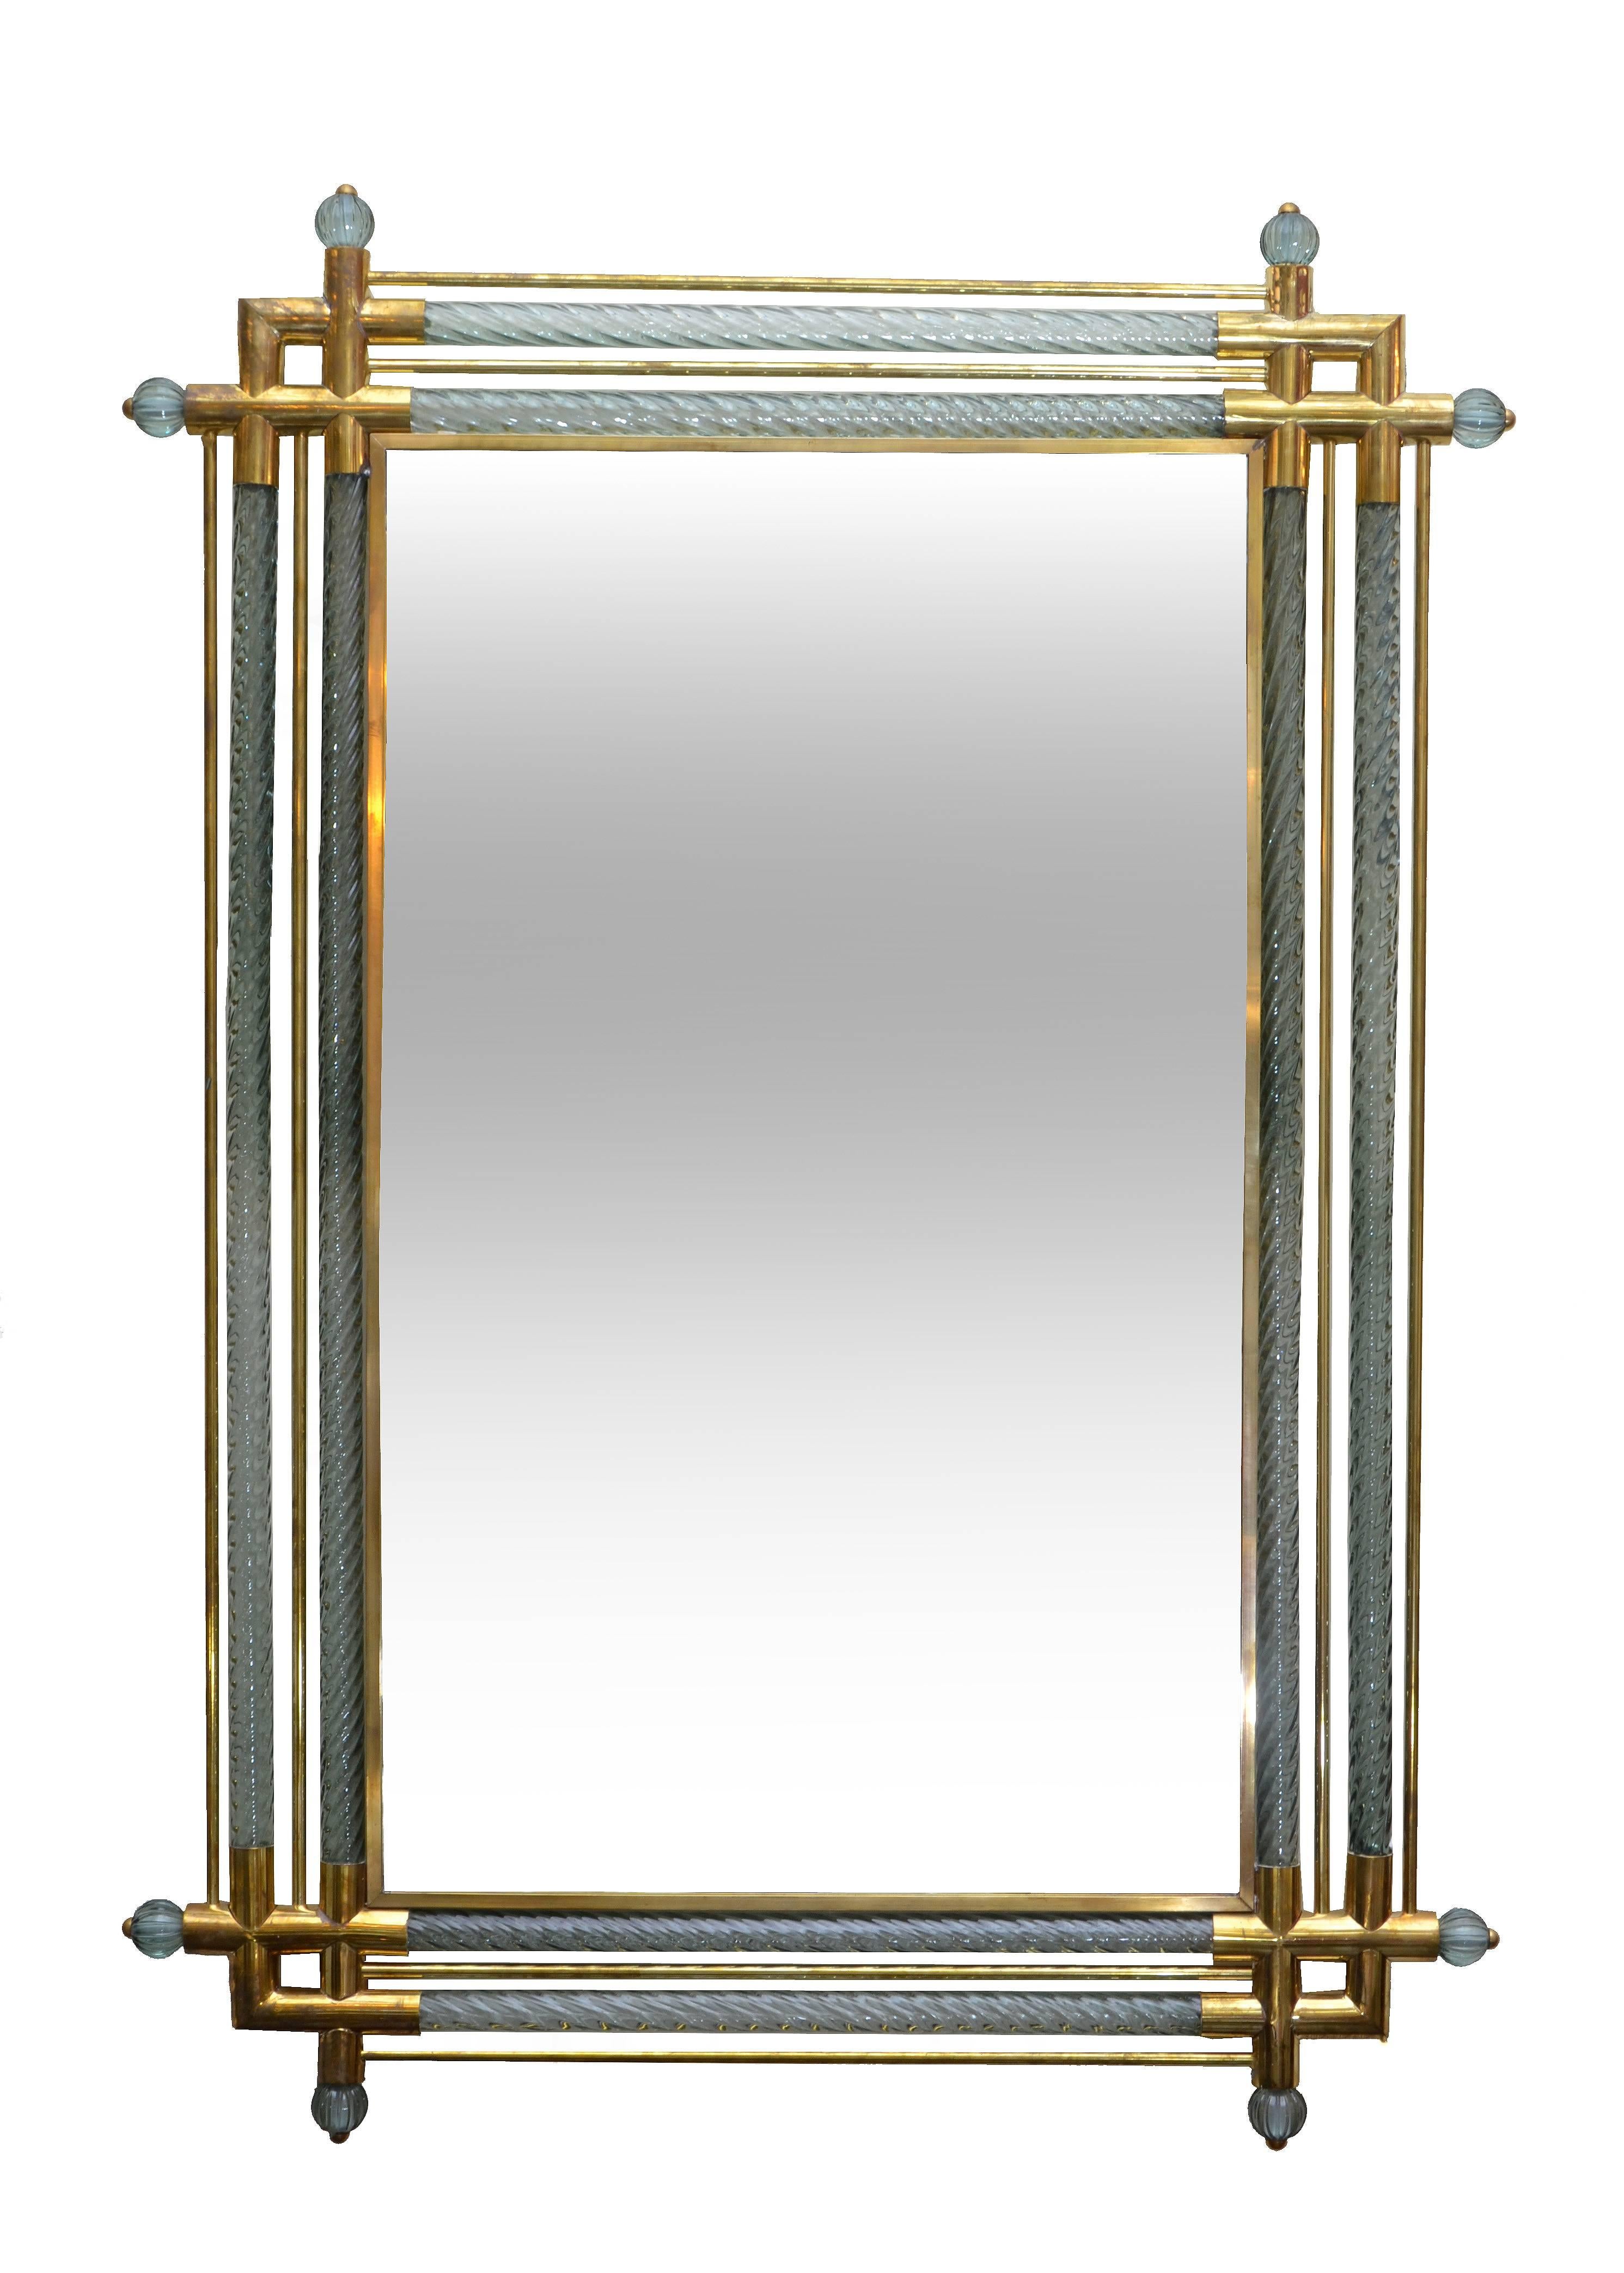 Venetian Mirror with double spiraled Murano glass border columns with brass tubular supports terminating with 2 glass balls at each corner.
Can be mounted in a portrait or landscape manner.
NOTE: Only ONE Mirror available.
